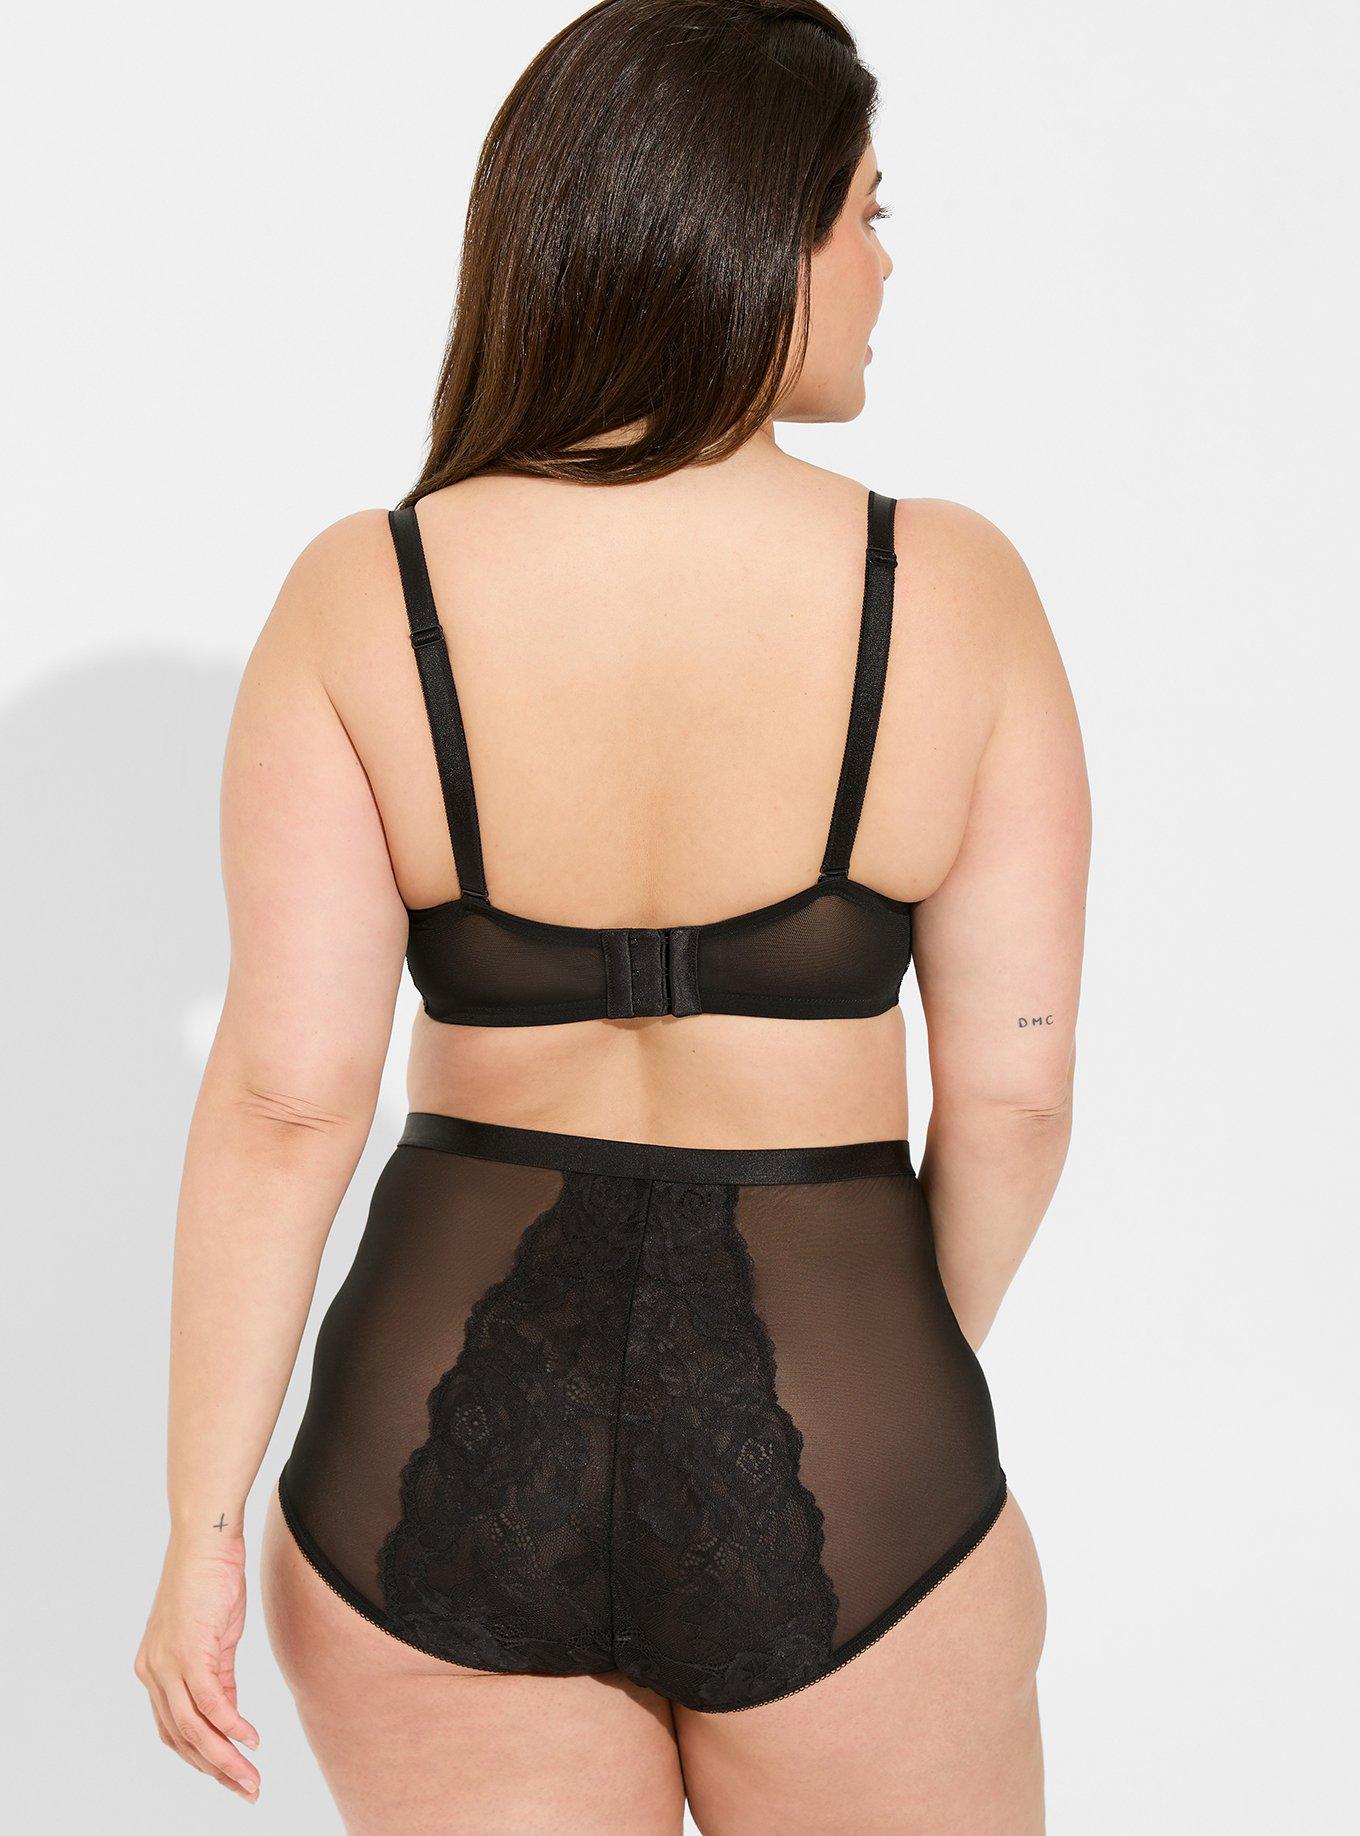 Floral Lace Seamless Brief Undergarments For Women Sexy And Comfortable  Lingerie In Plus Size From Tieshome, $2.5